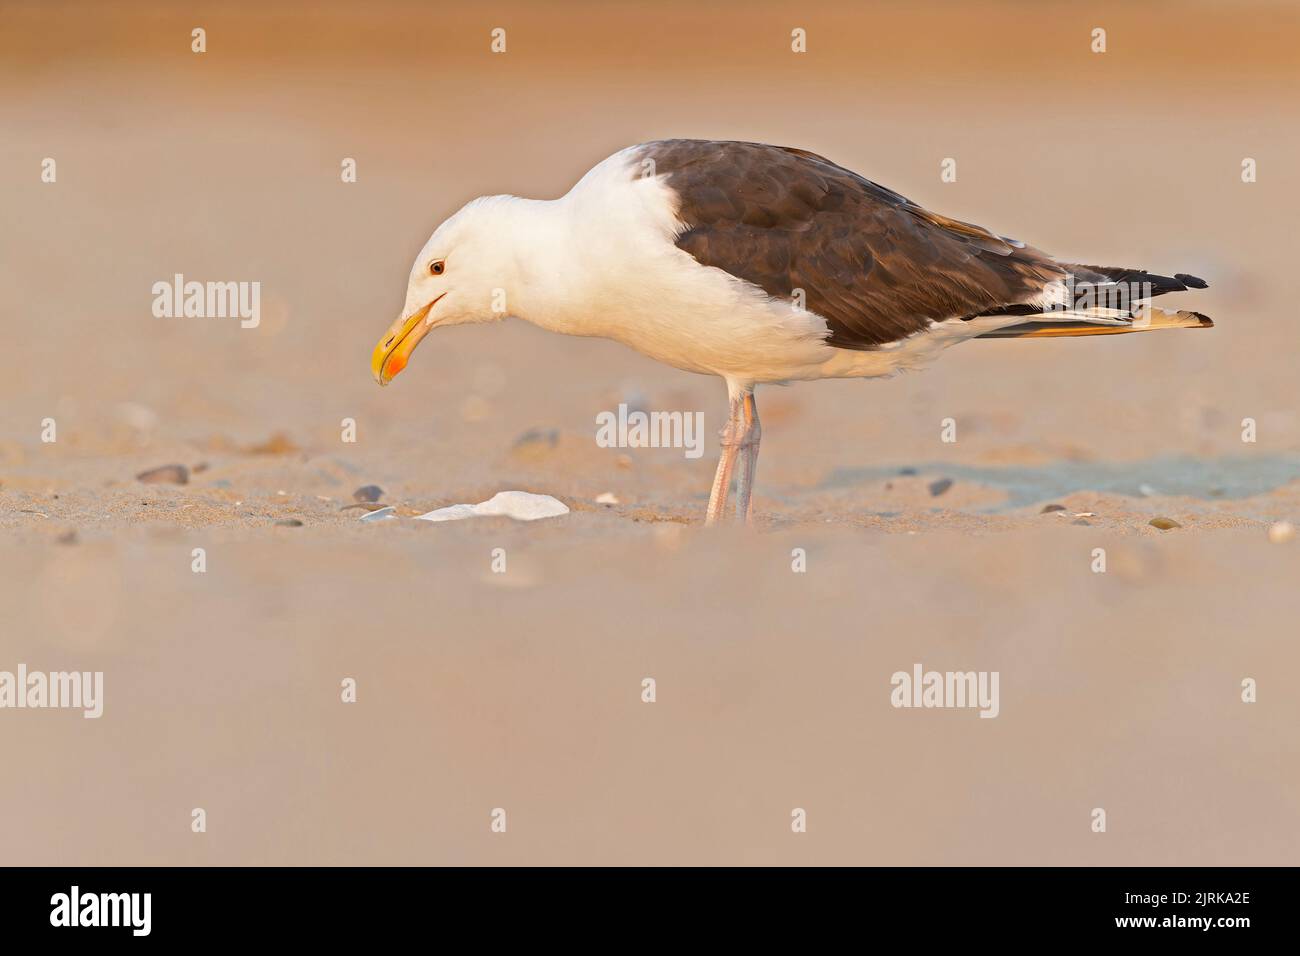 An adult great black-backed gull (Larus marinus) perched and foraging on the beach. Stock Photo